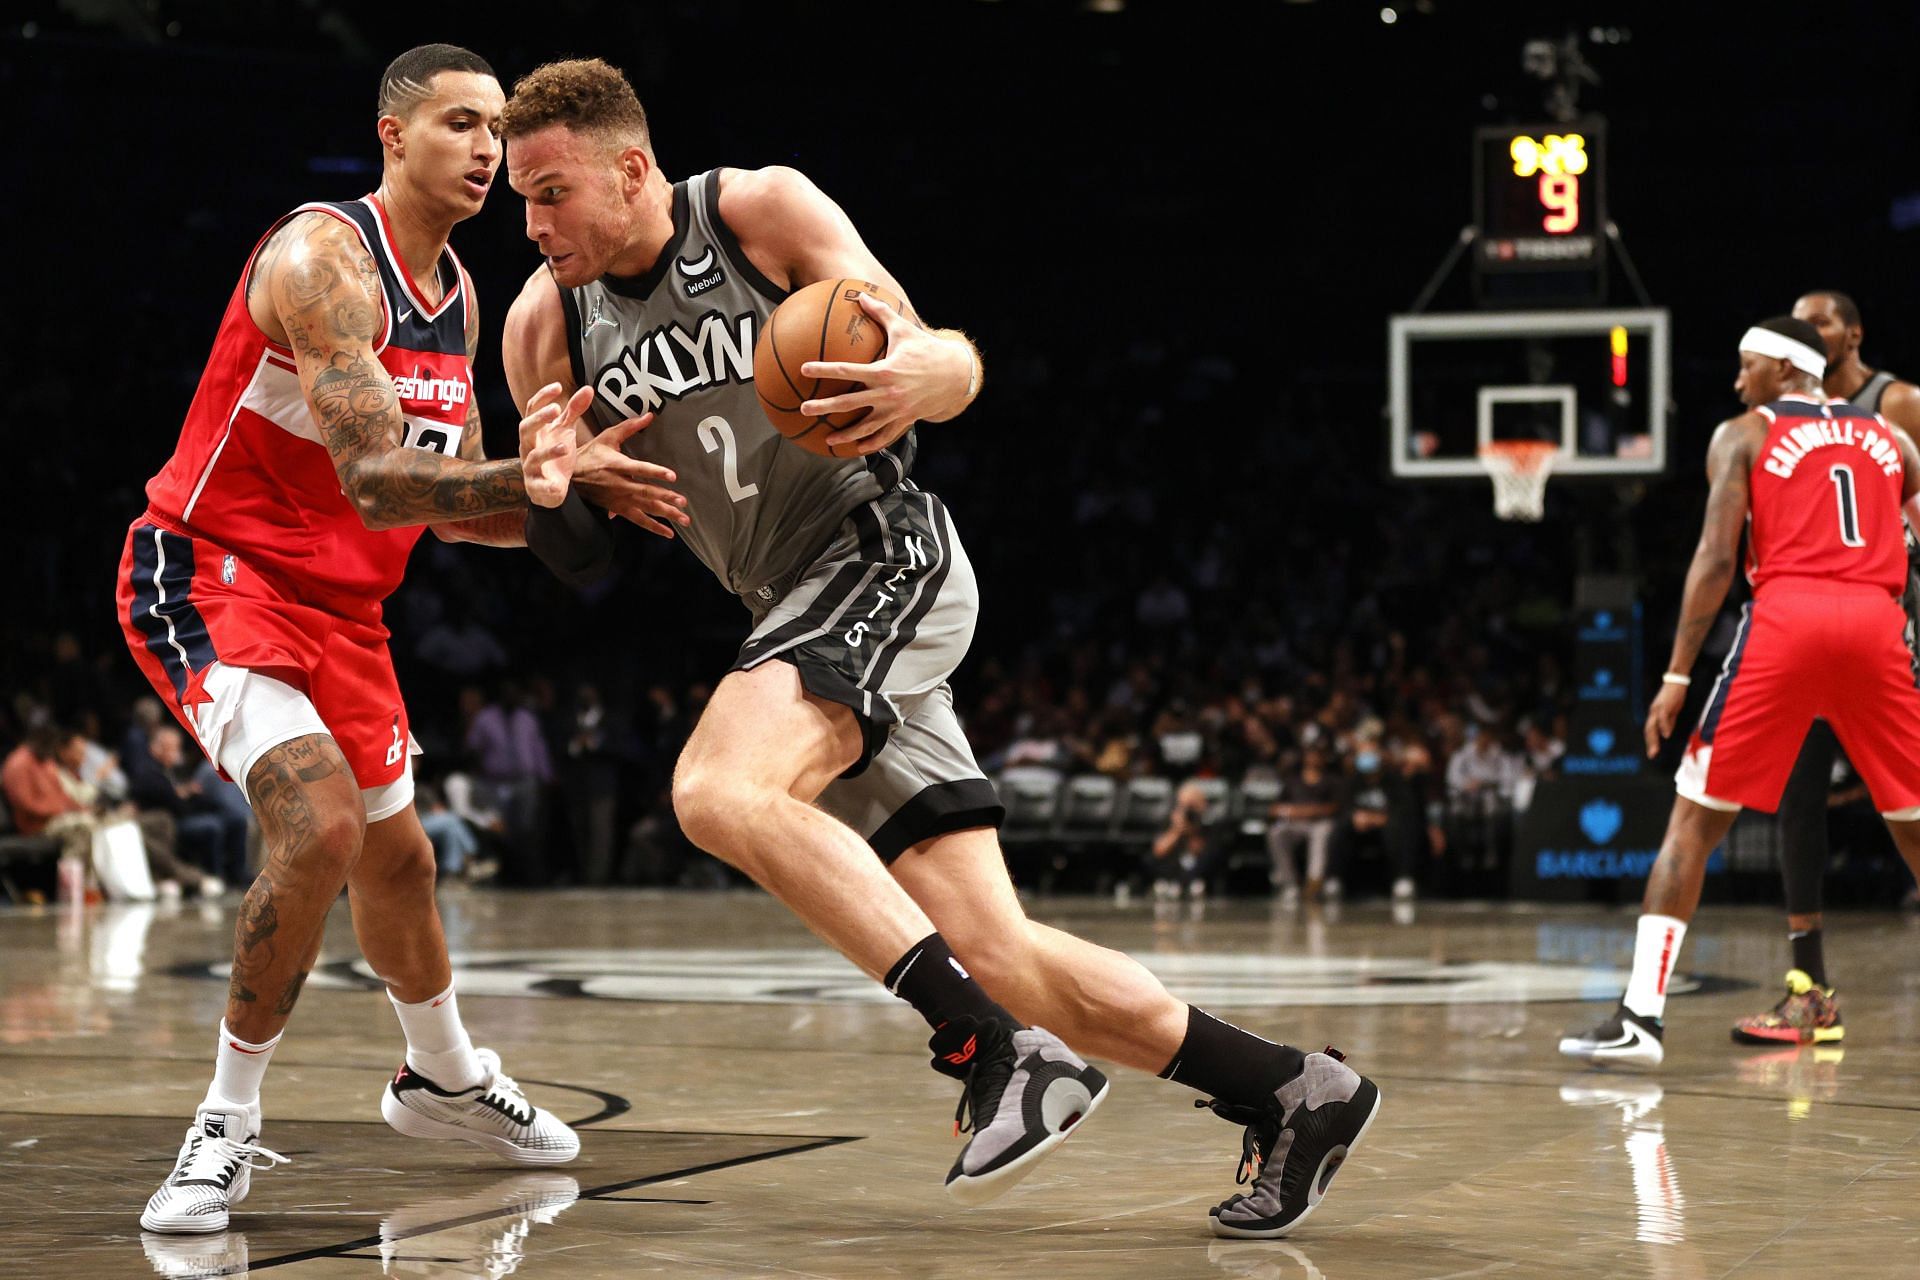 Blake Griffin #2 of the Brooklyn Nets dribbles against Kyle Kuzma #33 of the Washington Wizards